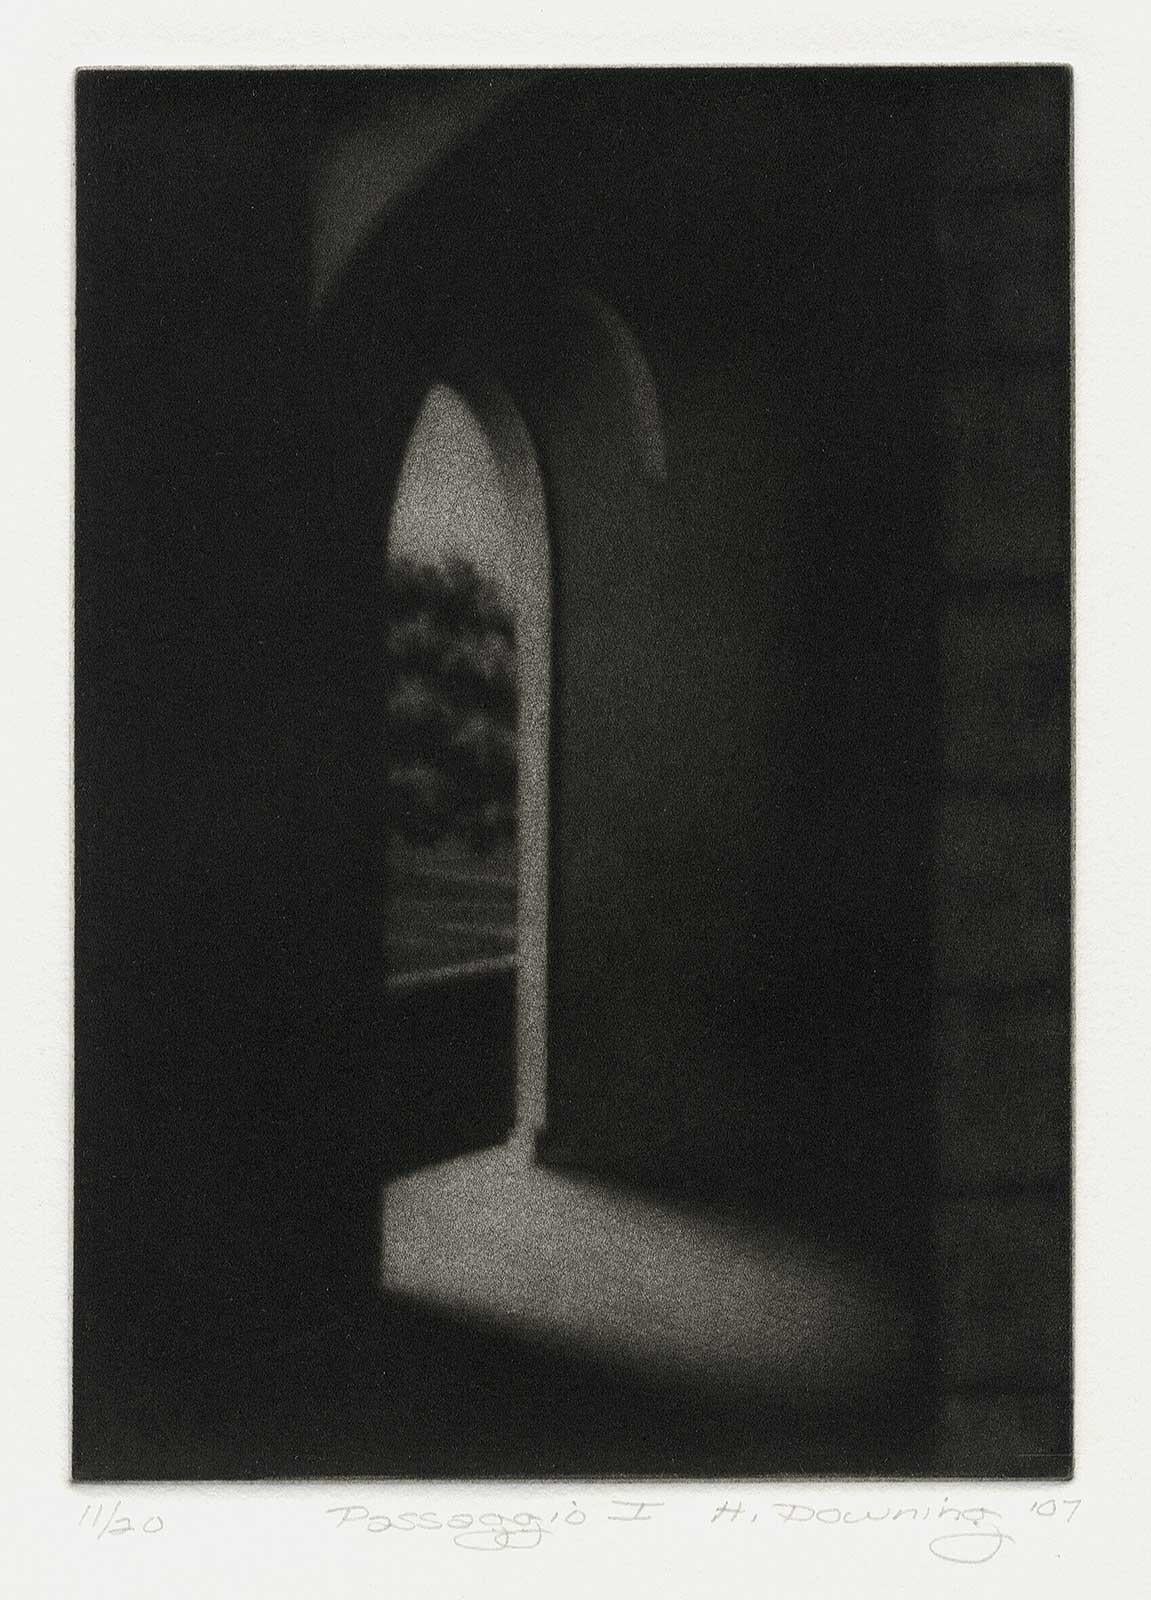 Passaggio I (A glimpse of the landscape through an arched portal) - Contemporary Print by Holly Downing